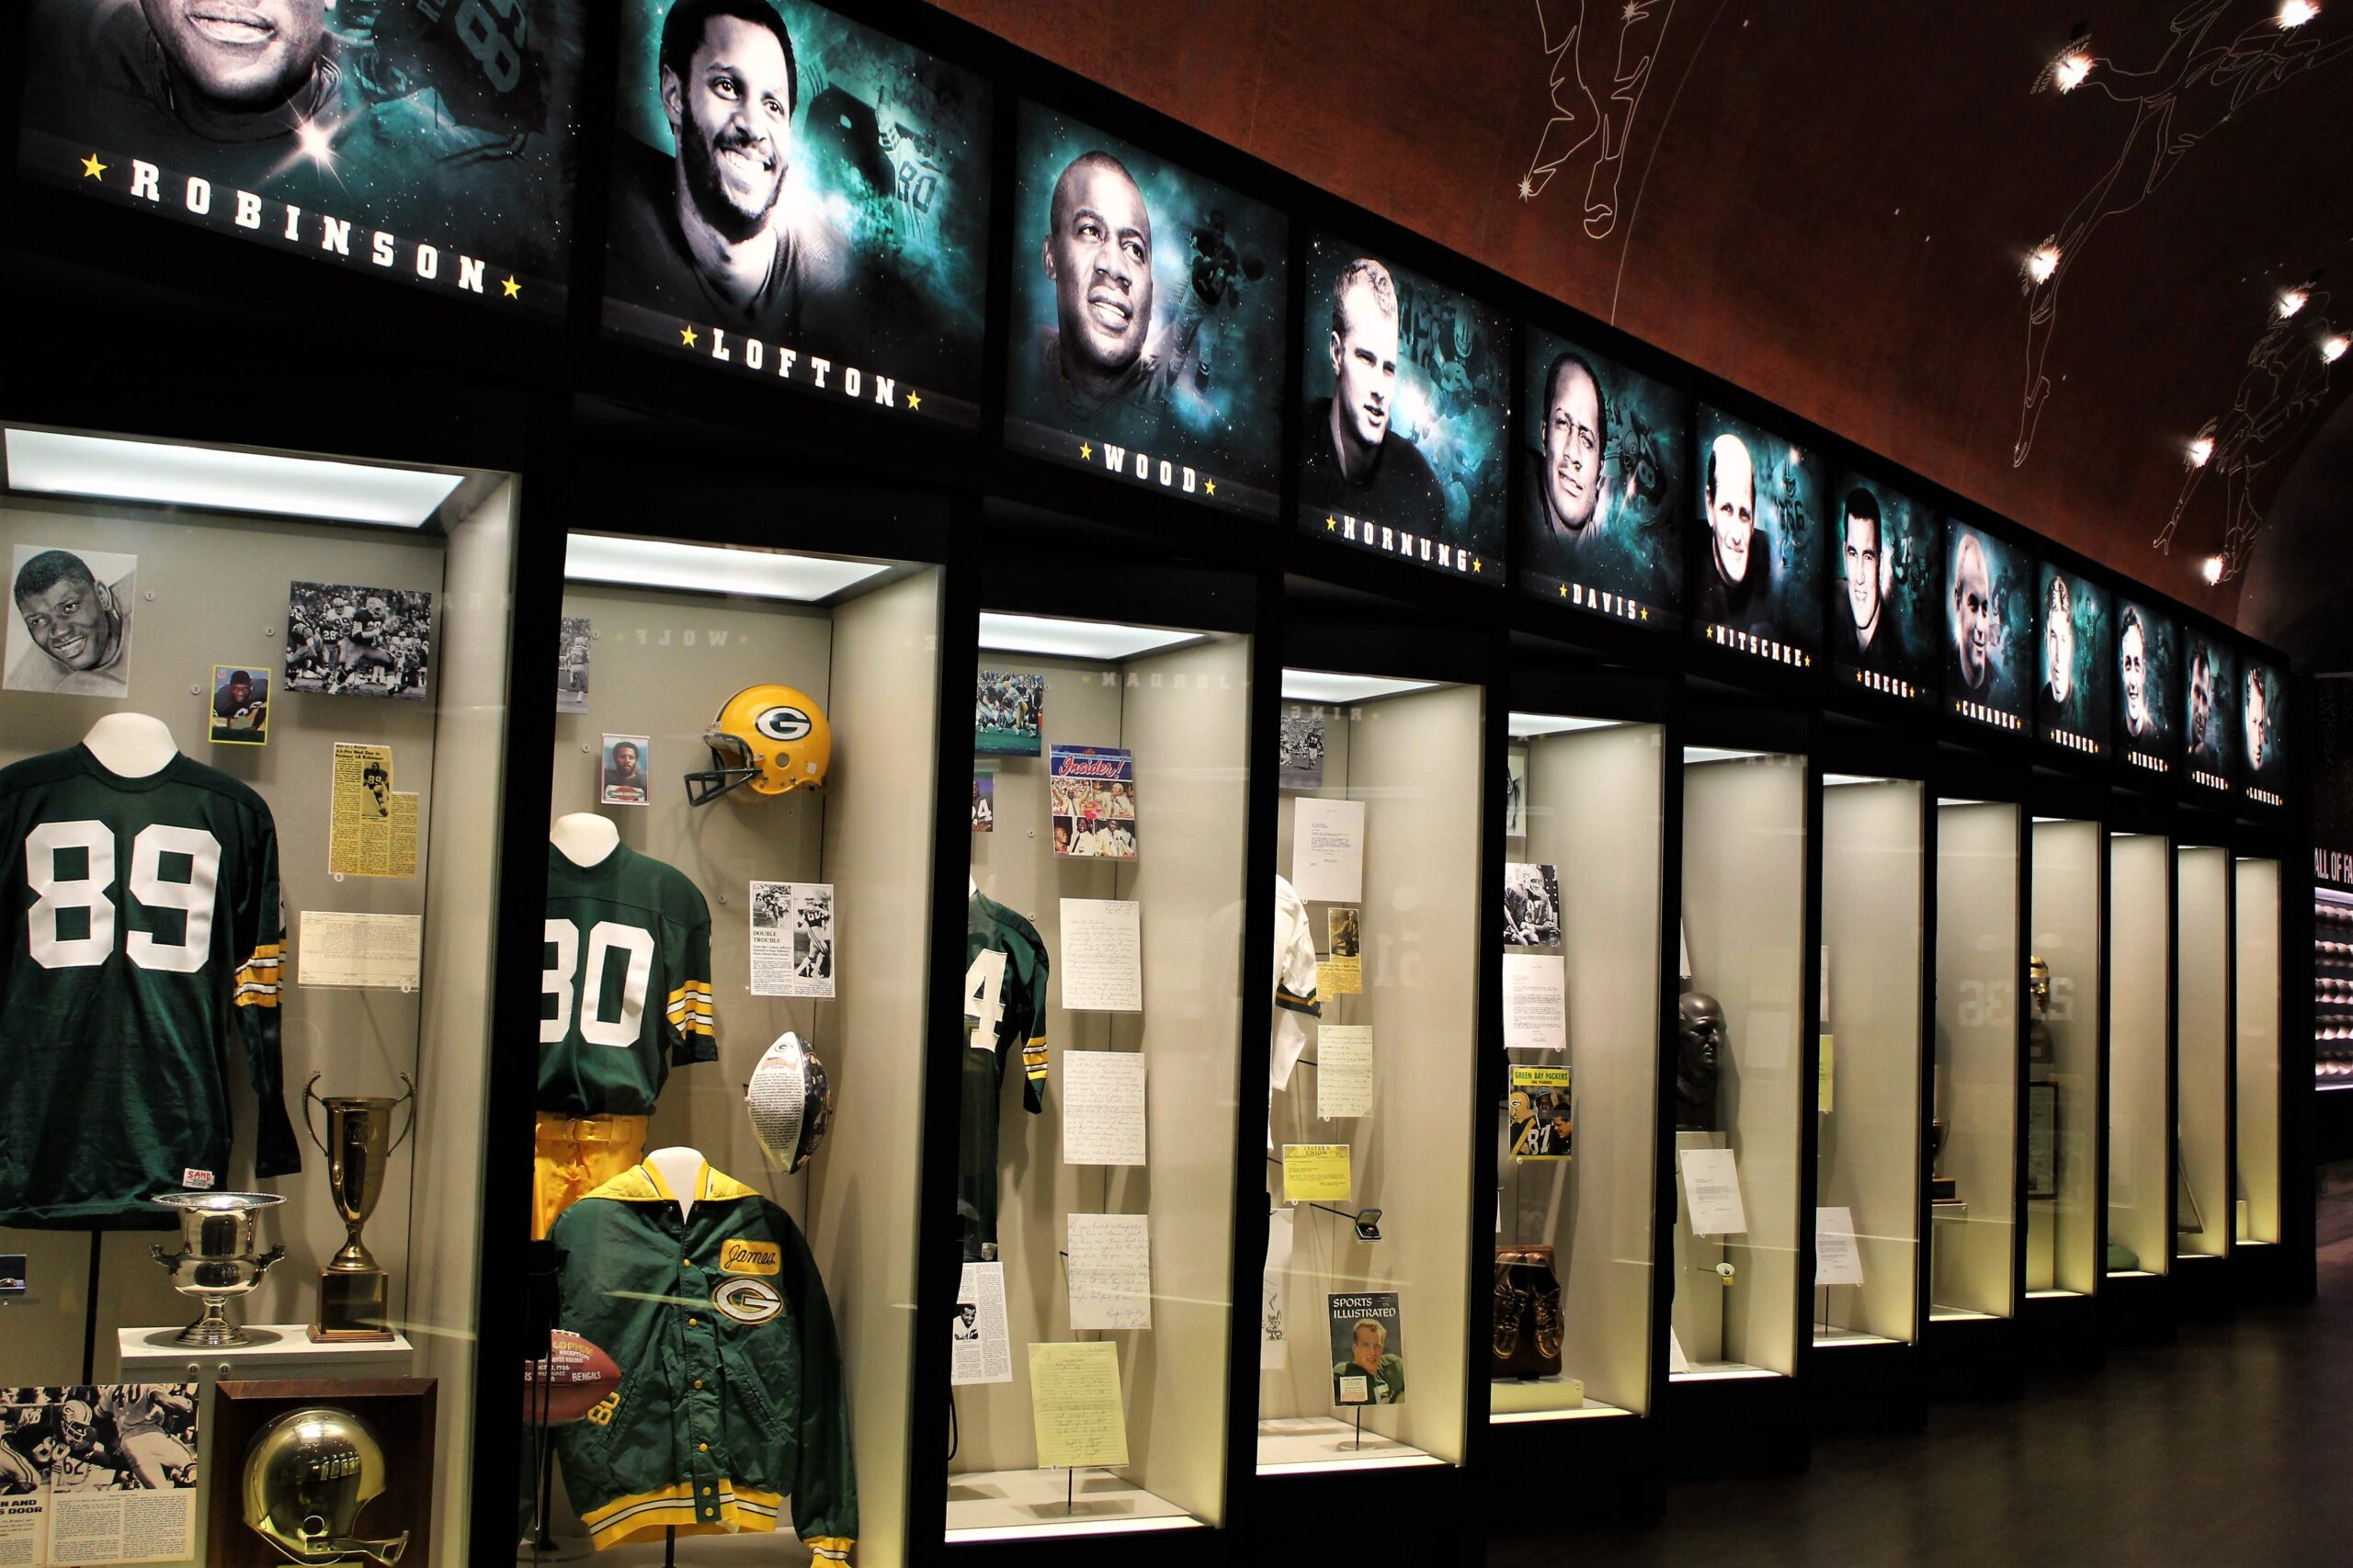 packers hall of fame members